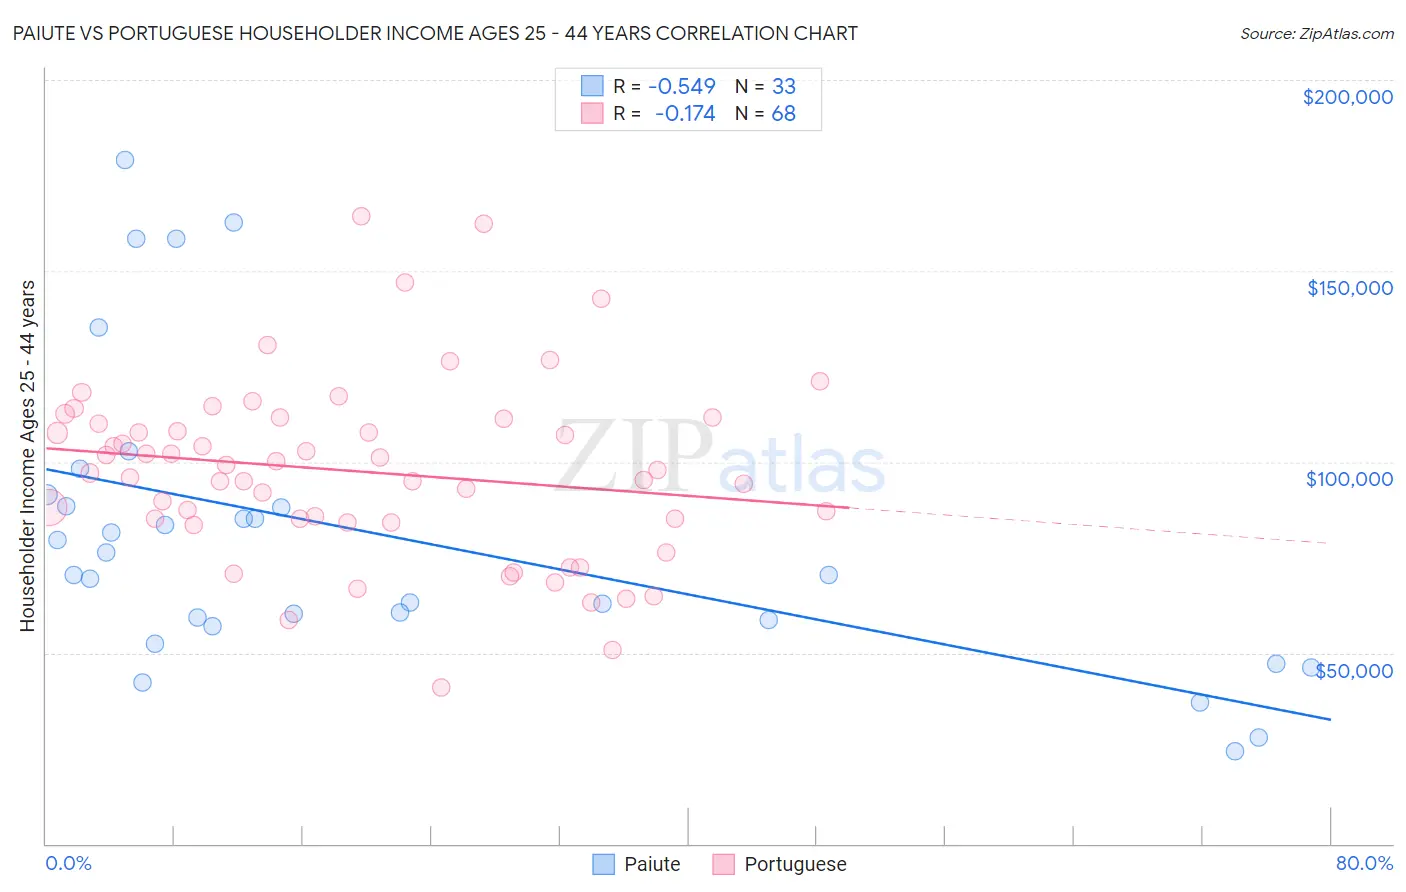 Paiute vs Portuguese Householder Income Ages 25 - 44 years